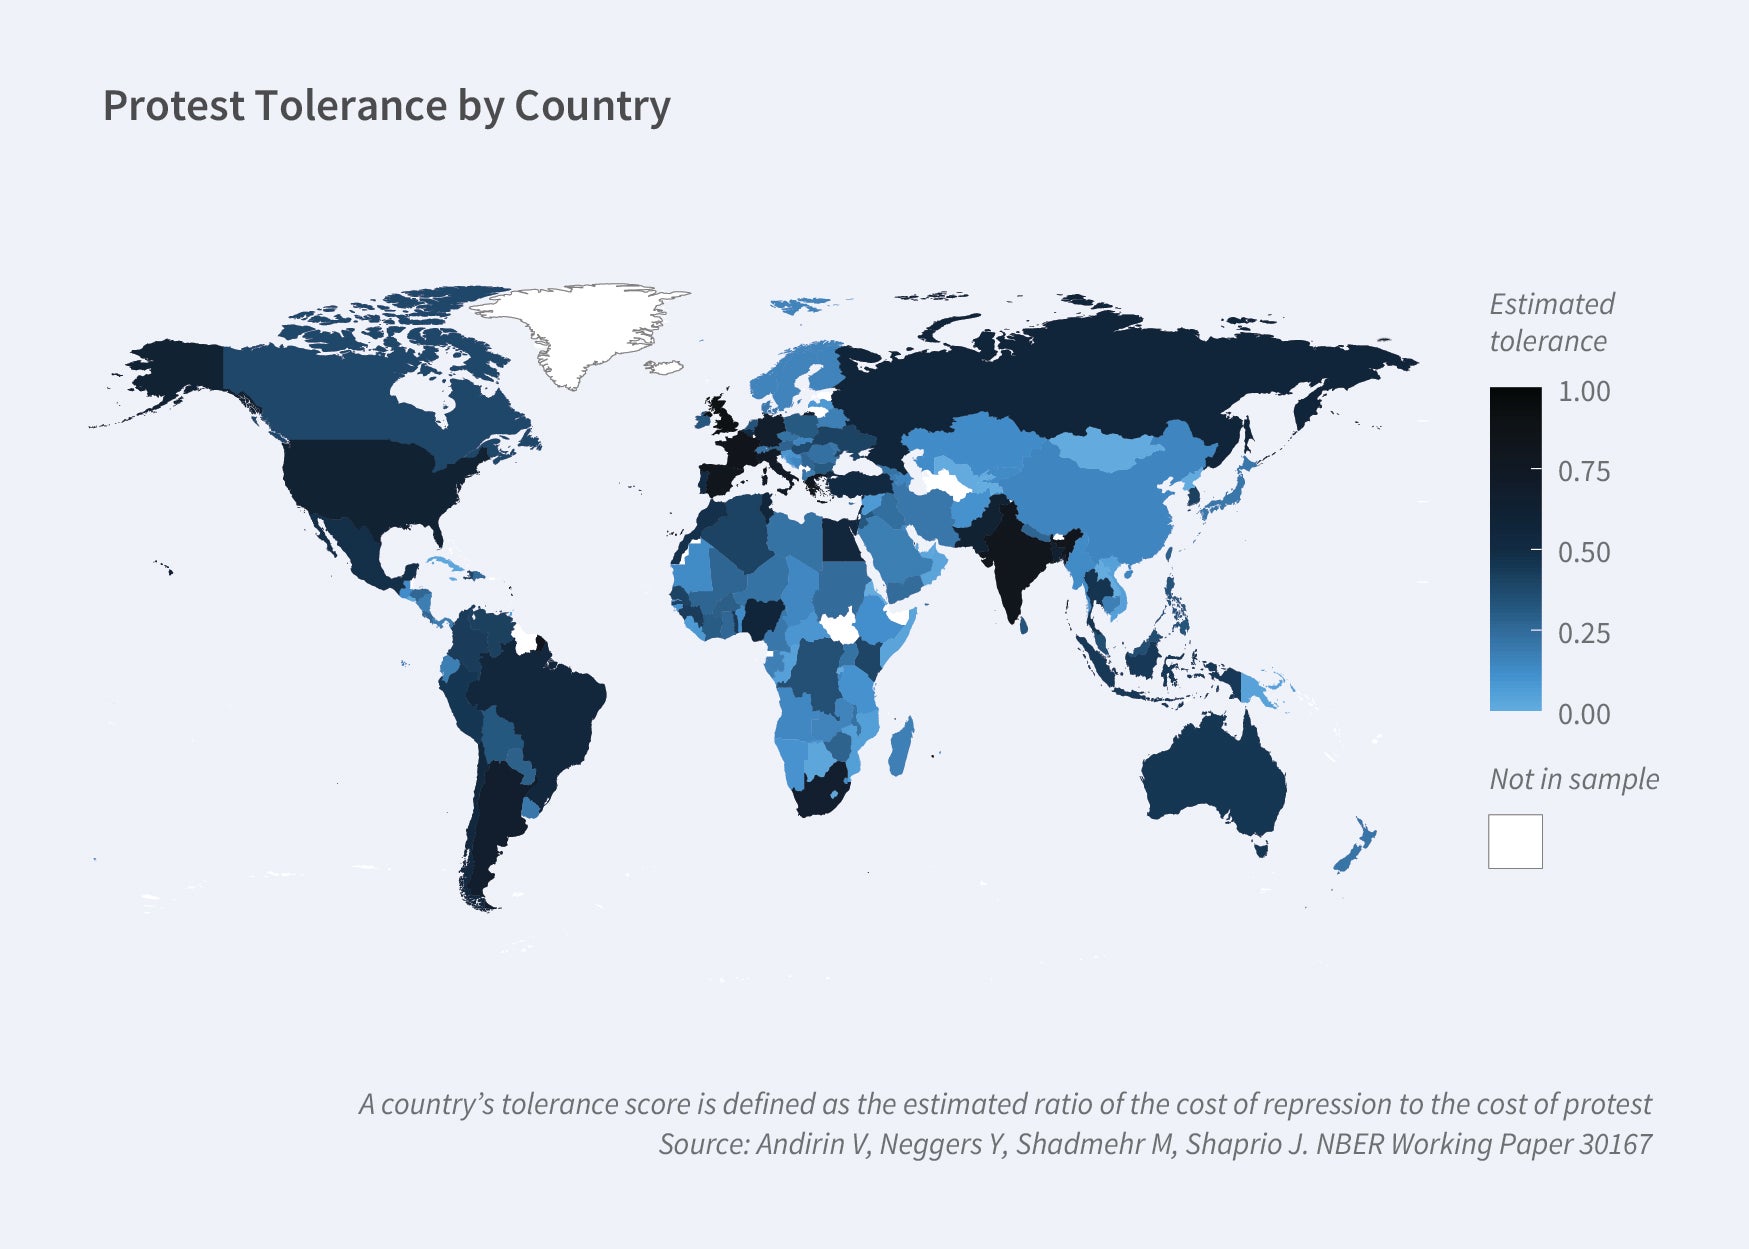 Program Report Figure 4: This is a cartogram of a world map titled Protest tolerance by Country.  The map key shows that countries are colored coded by their estimated tolerance ranging from 0 to 1. Countries not in the sample are left colorless. Using shades of blue, darker shades indicated a higher level of estimated tolerance. The majority of the countries in North and South America have higher estimated tolerance scores while the majority in Asia and Africa have lower estimates. In Europe, countries in the west have higher estimated scores and scores decline as you move east.  The figure annotation reads A country’s tolerance score is defined as the estimated ratio of the cost of repression to the cost of protest. The source line reads Source: Andirin V, Neggers Y, Shadmehr M, Shapiro J. NBER Working Paper 30167. 